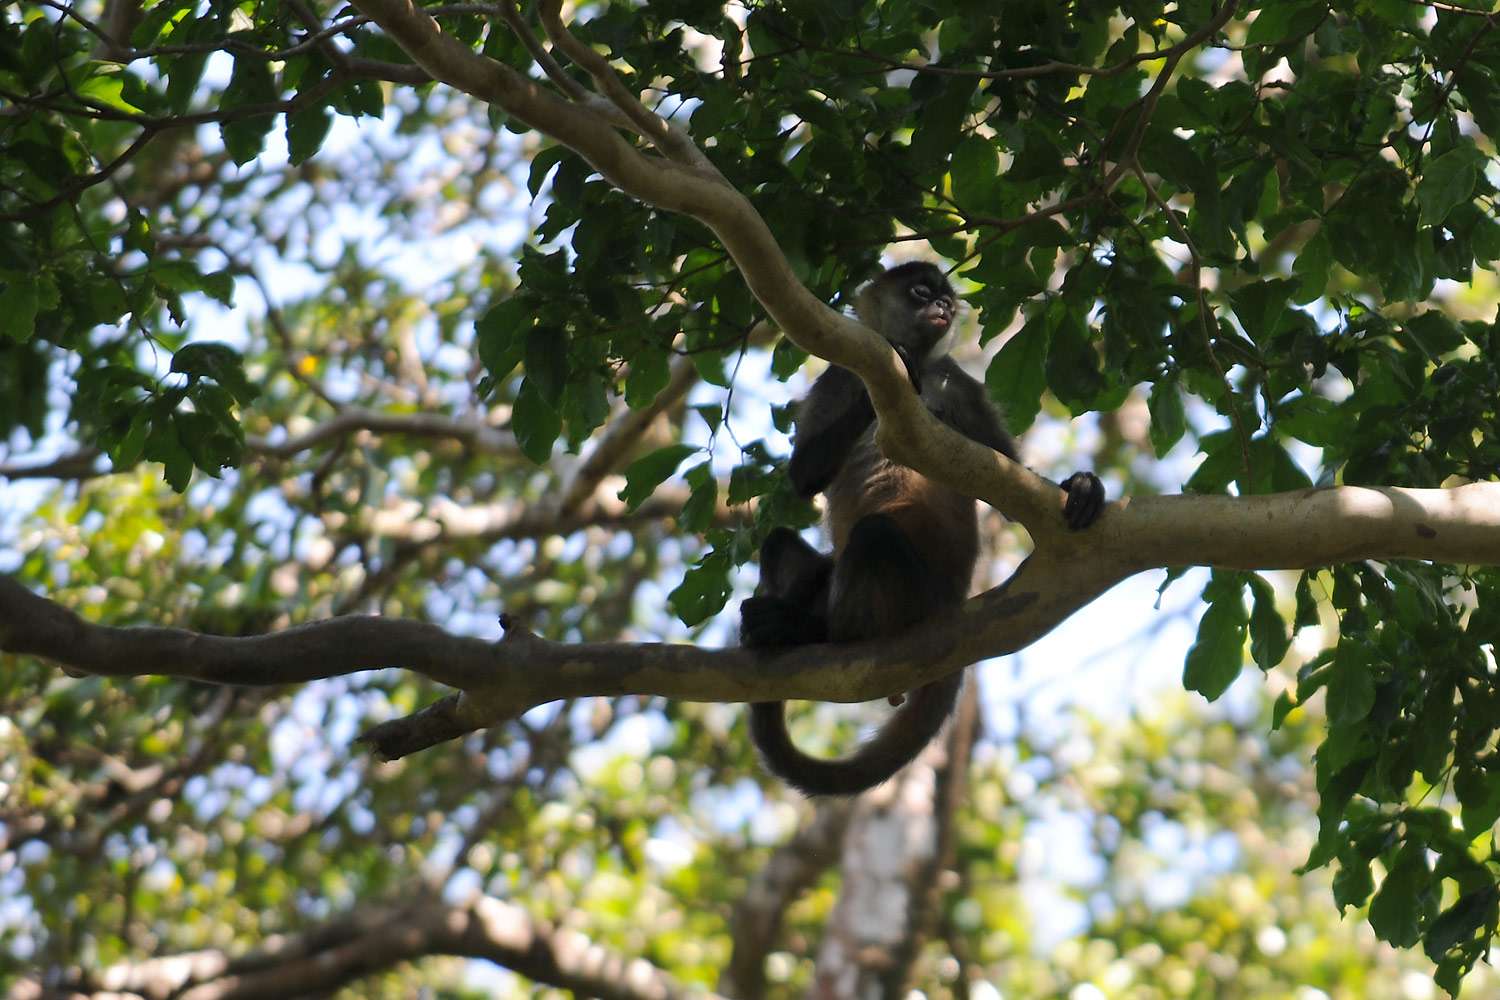 Monkey watching from a tree, Costa Rica.